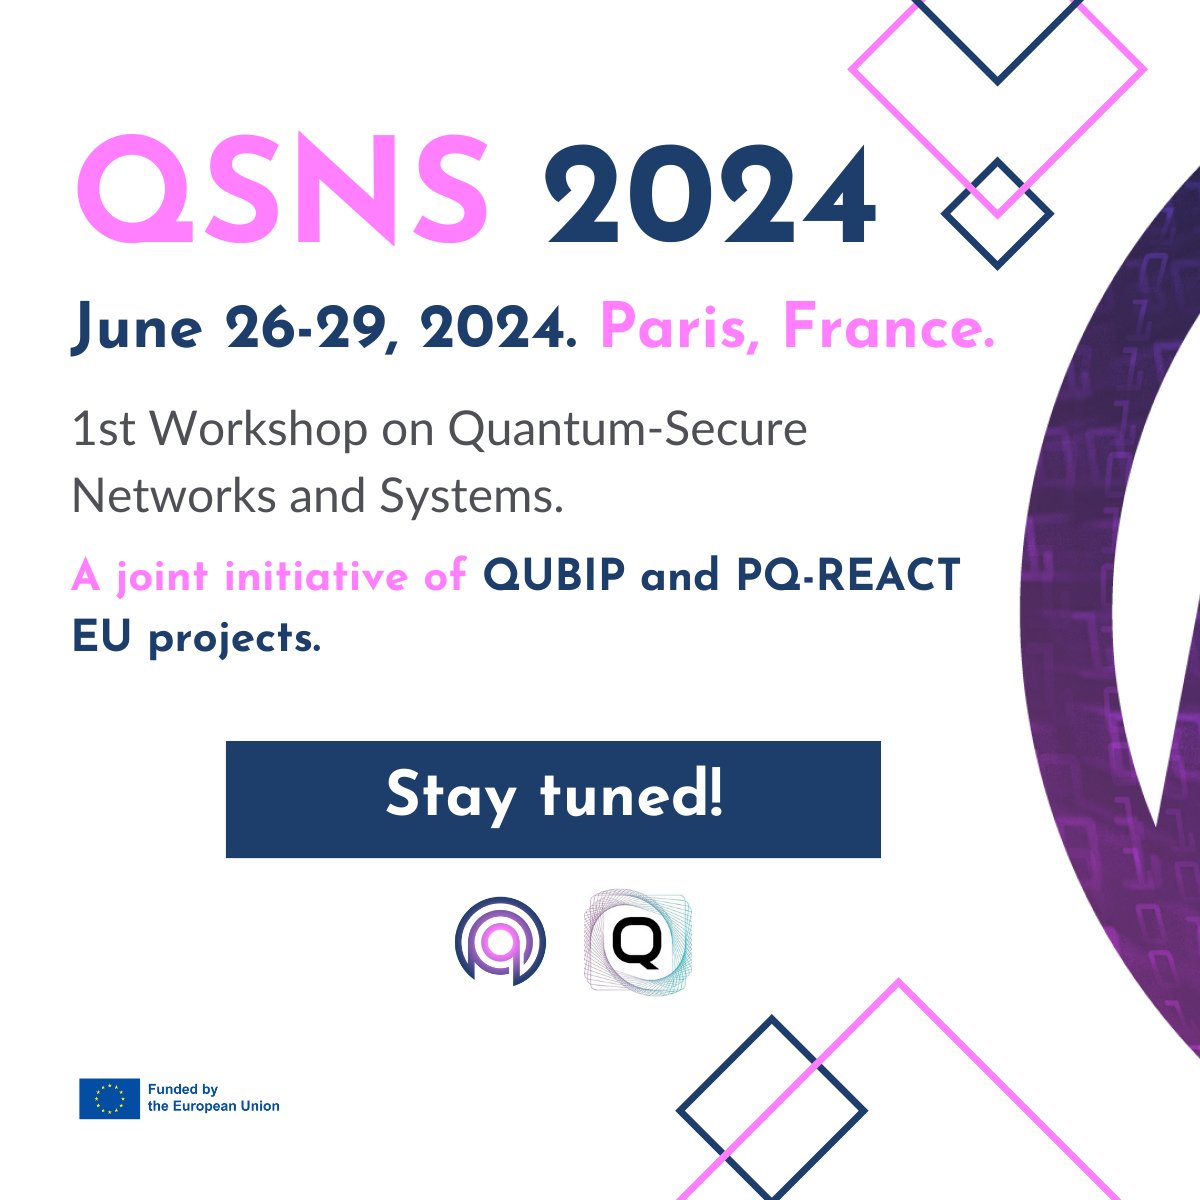 🤝 We welcome you to the QSNS2024 workshop! A joint initiative of the @qubip_eu & @PQREACT projects, co-funded by the EU under the Horizon Europe framework programme on the transition to Post-Quantum Cryptography of protocols, networks, and systems! 💡qubip.eu/qsns2024/